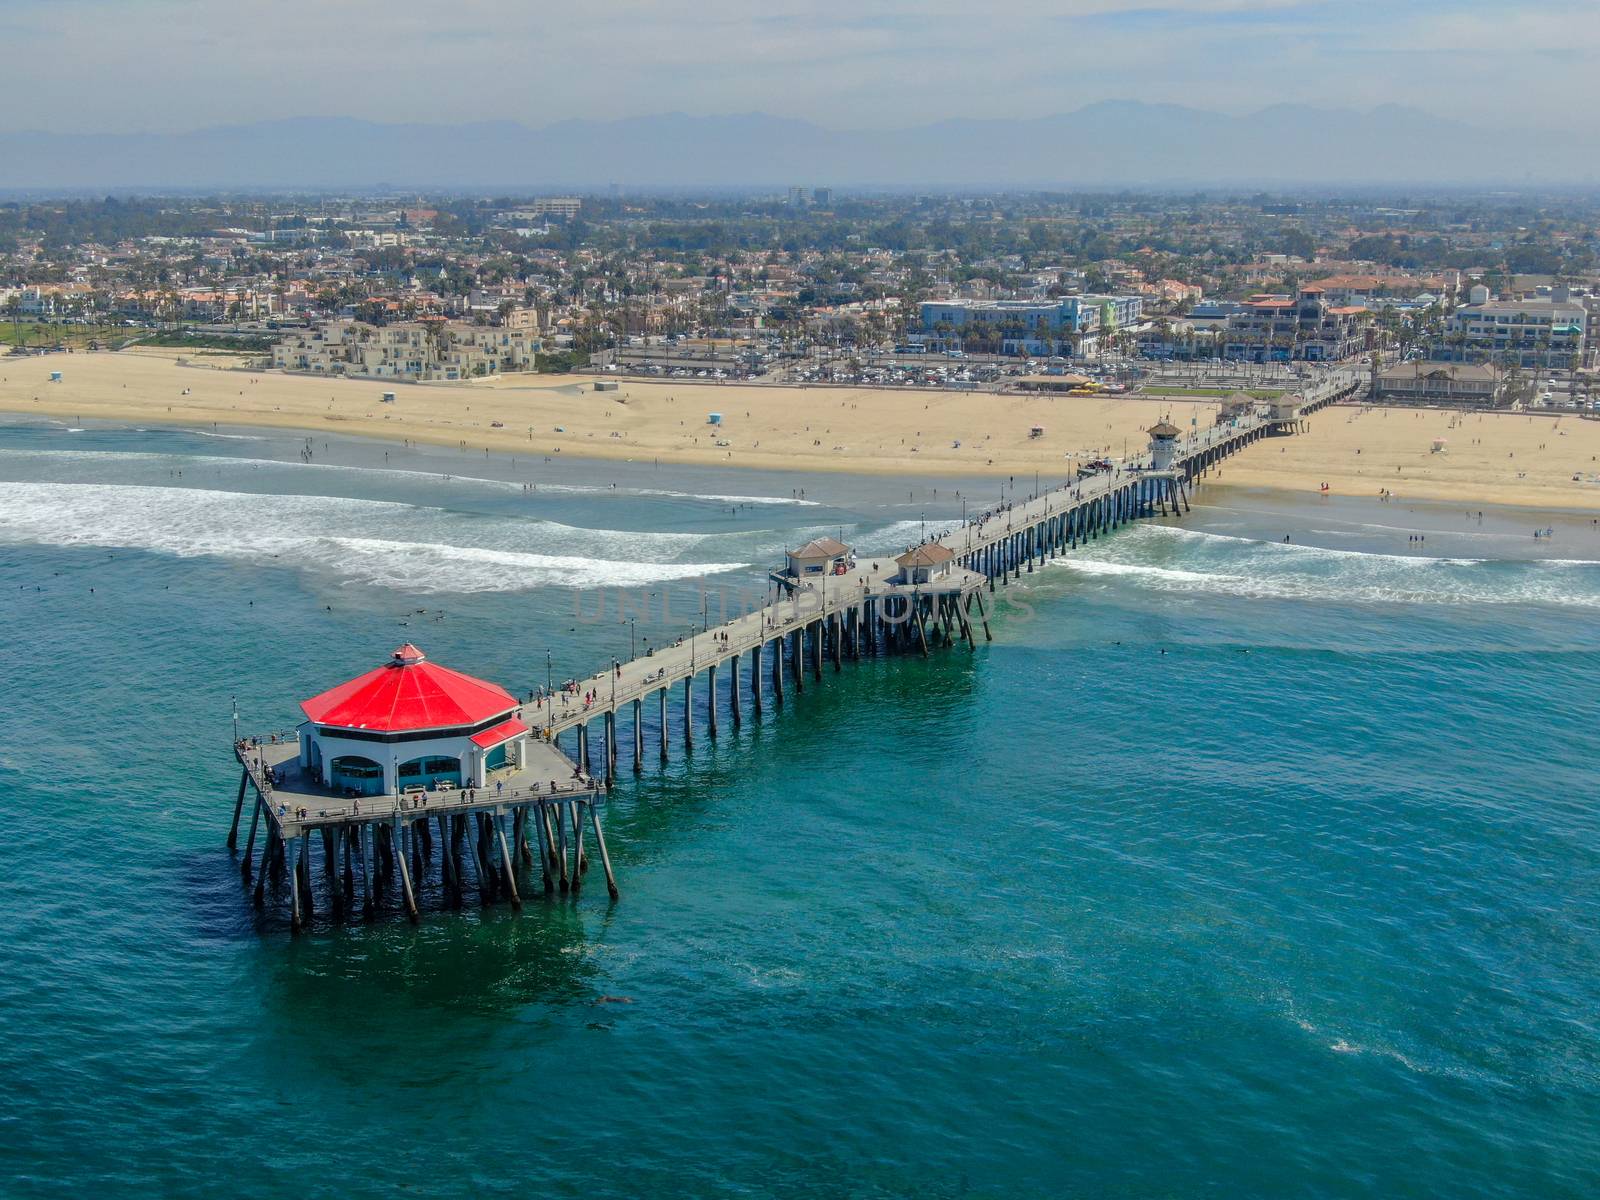 Aerial view of Huntington Pier, beach and coastline during sunny summer day by Bonandbon